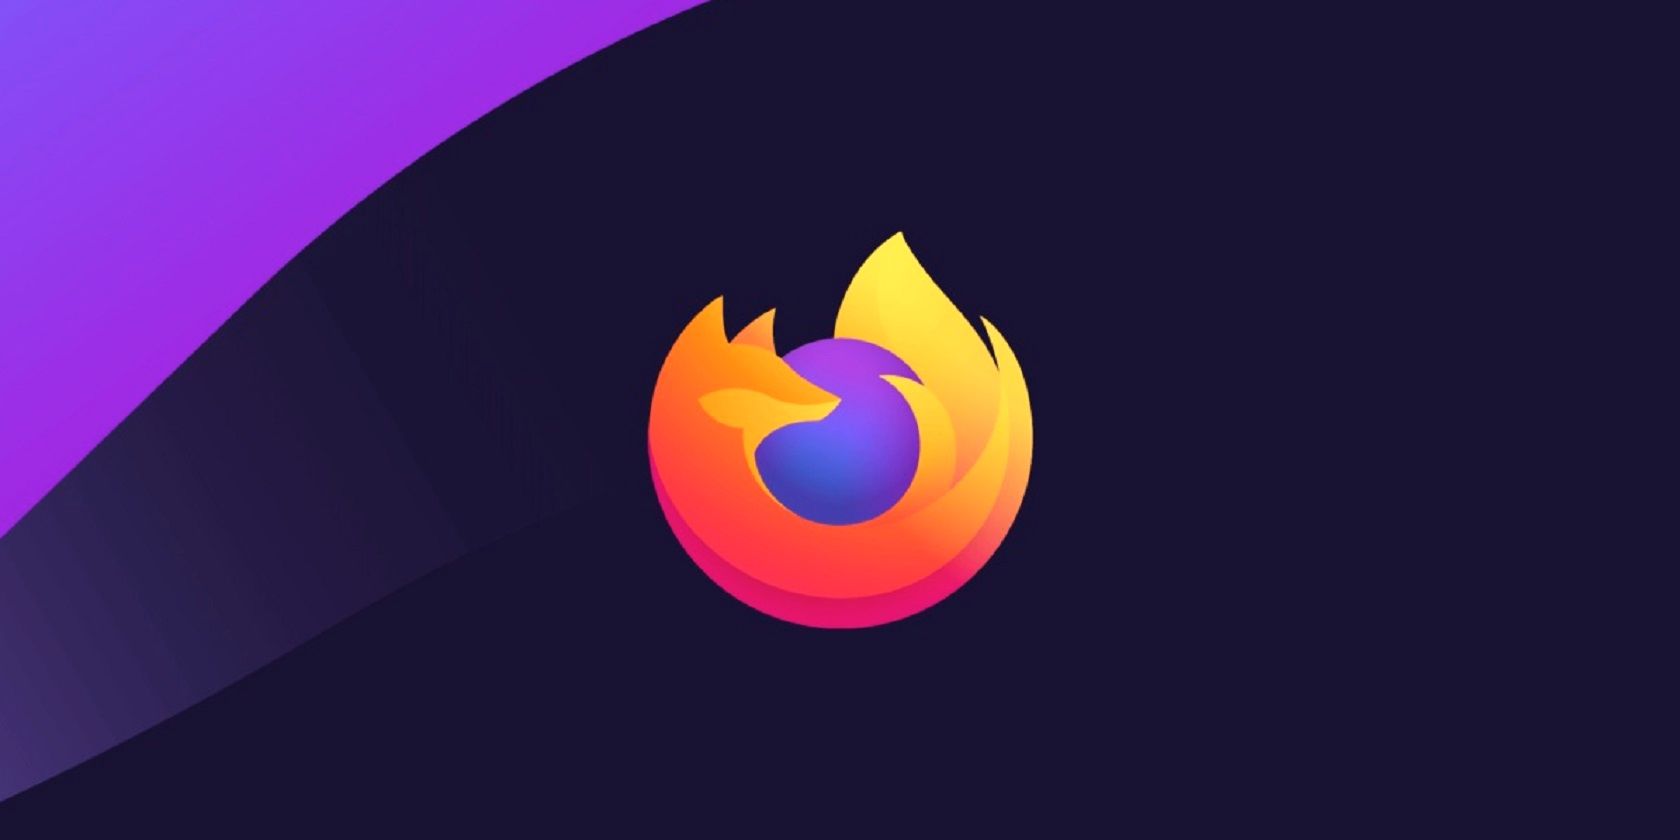 Firefox 97 Has Arrived: Here's What's New, Changed, and Fixed